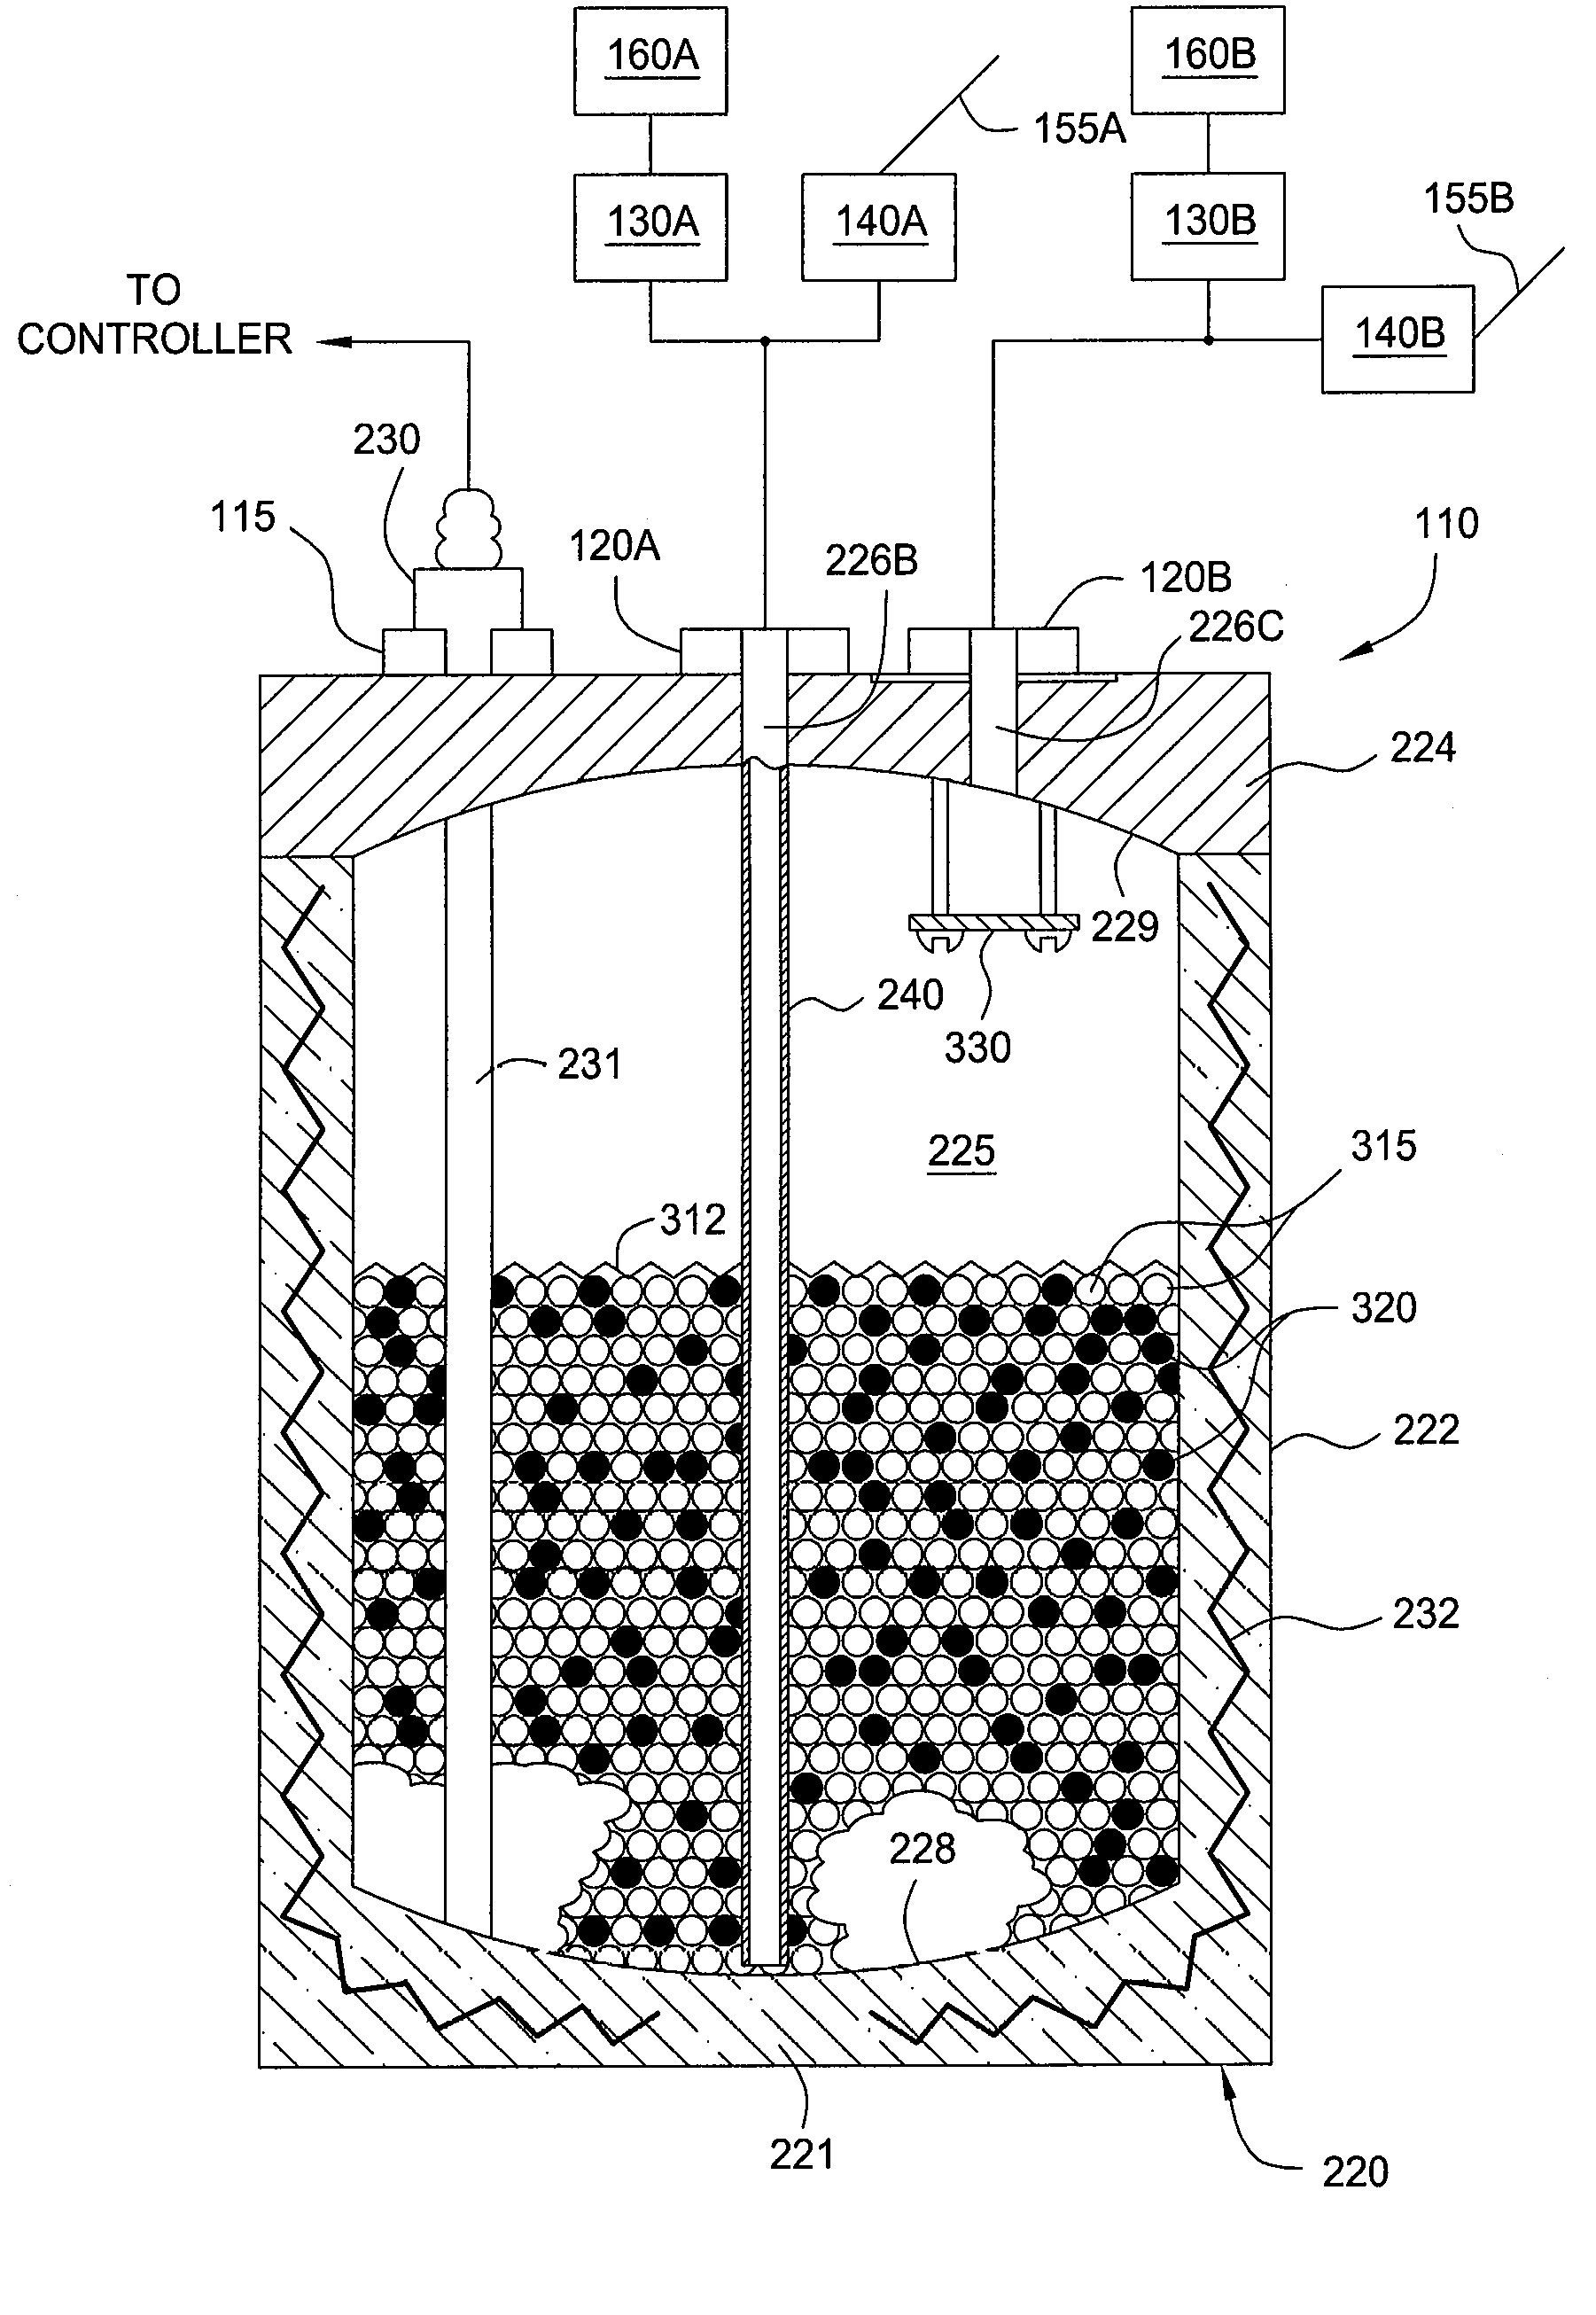 Ampoule for liquid draw and vapor draw with a continuous level sensor